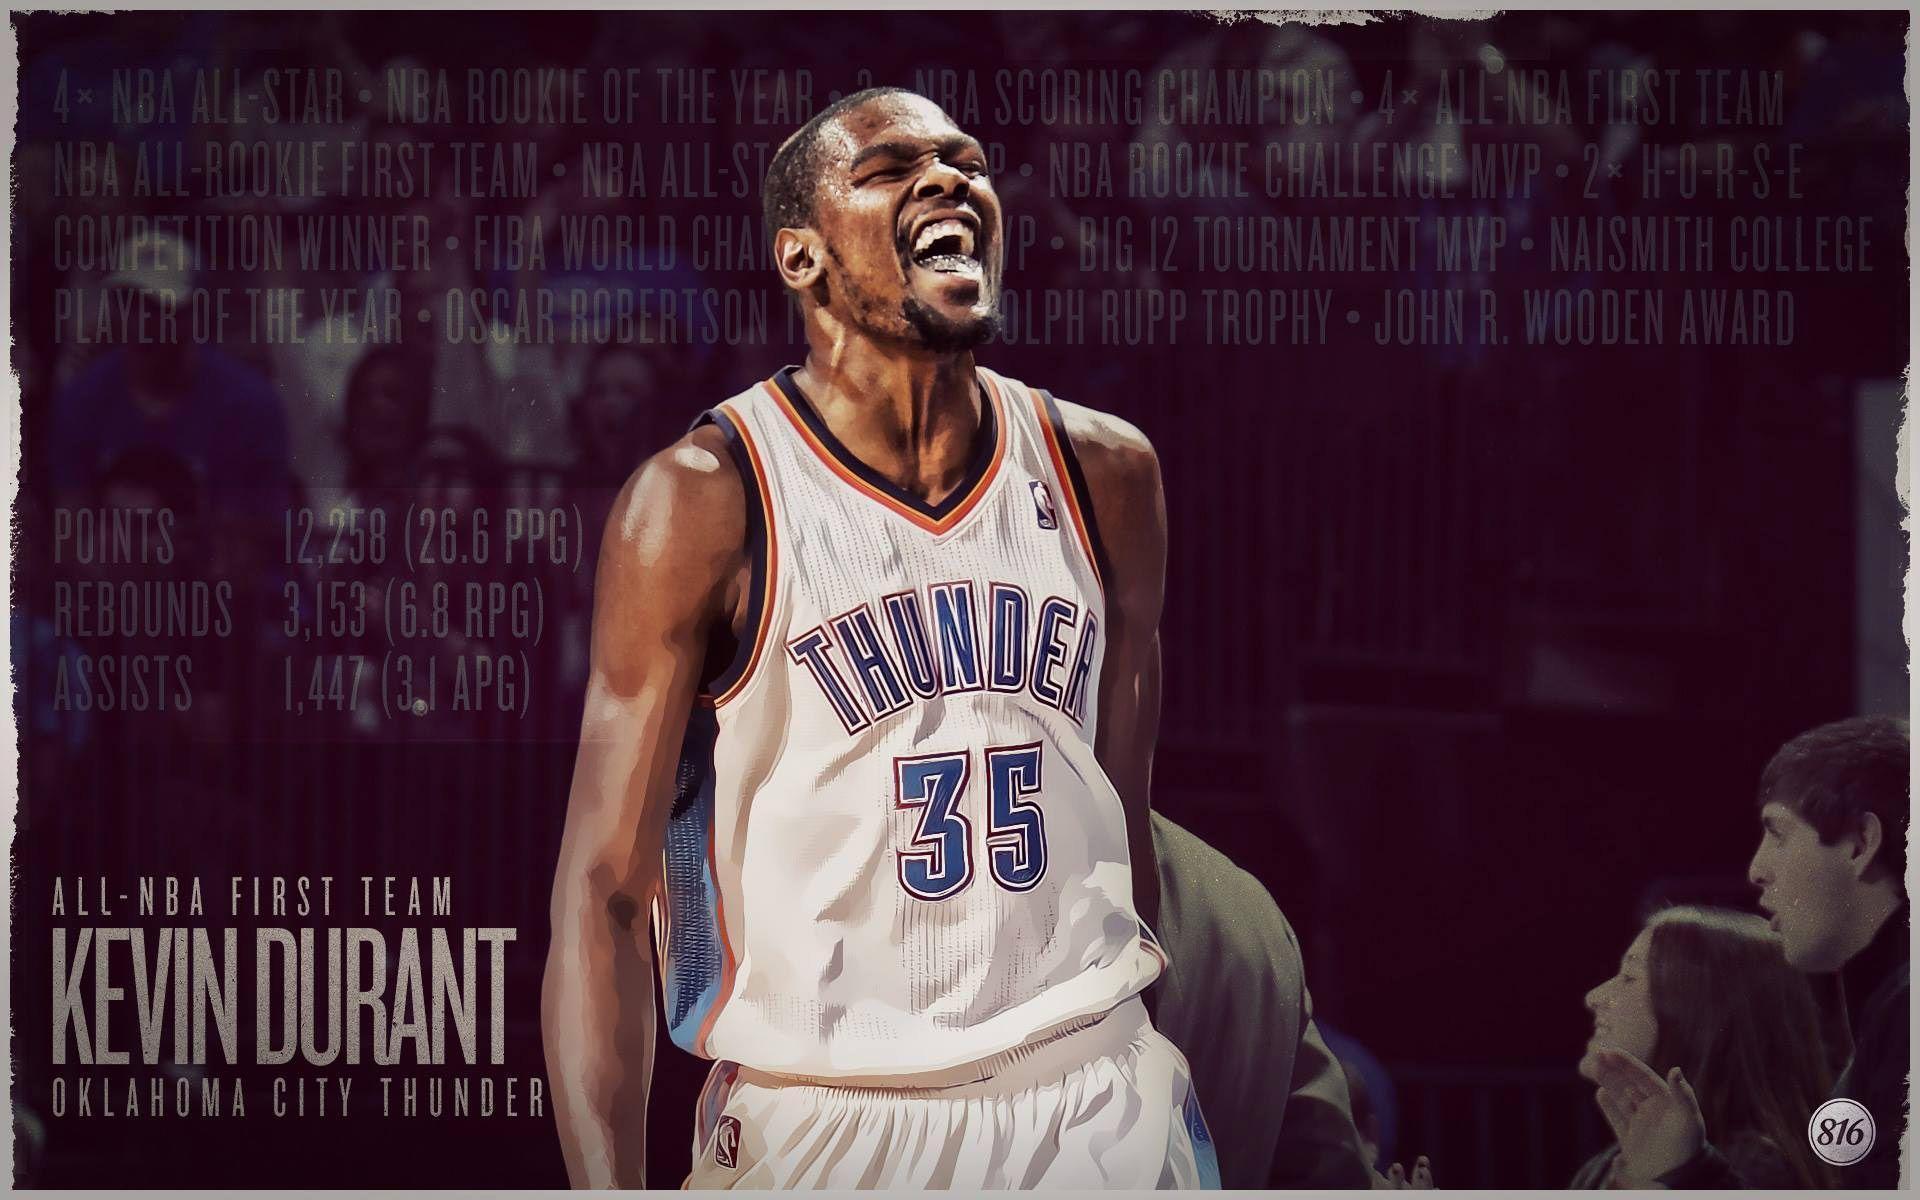 Kevin Durant Wallpapers 2015 Hd Wallpaper Cave